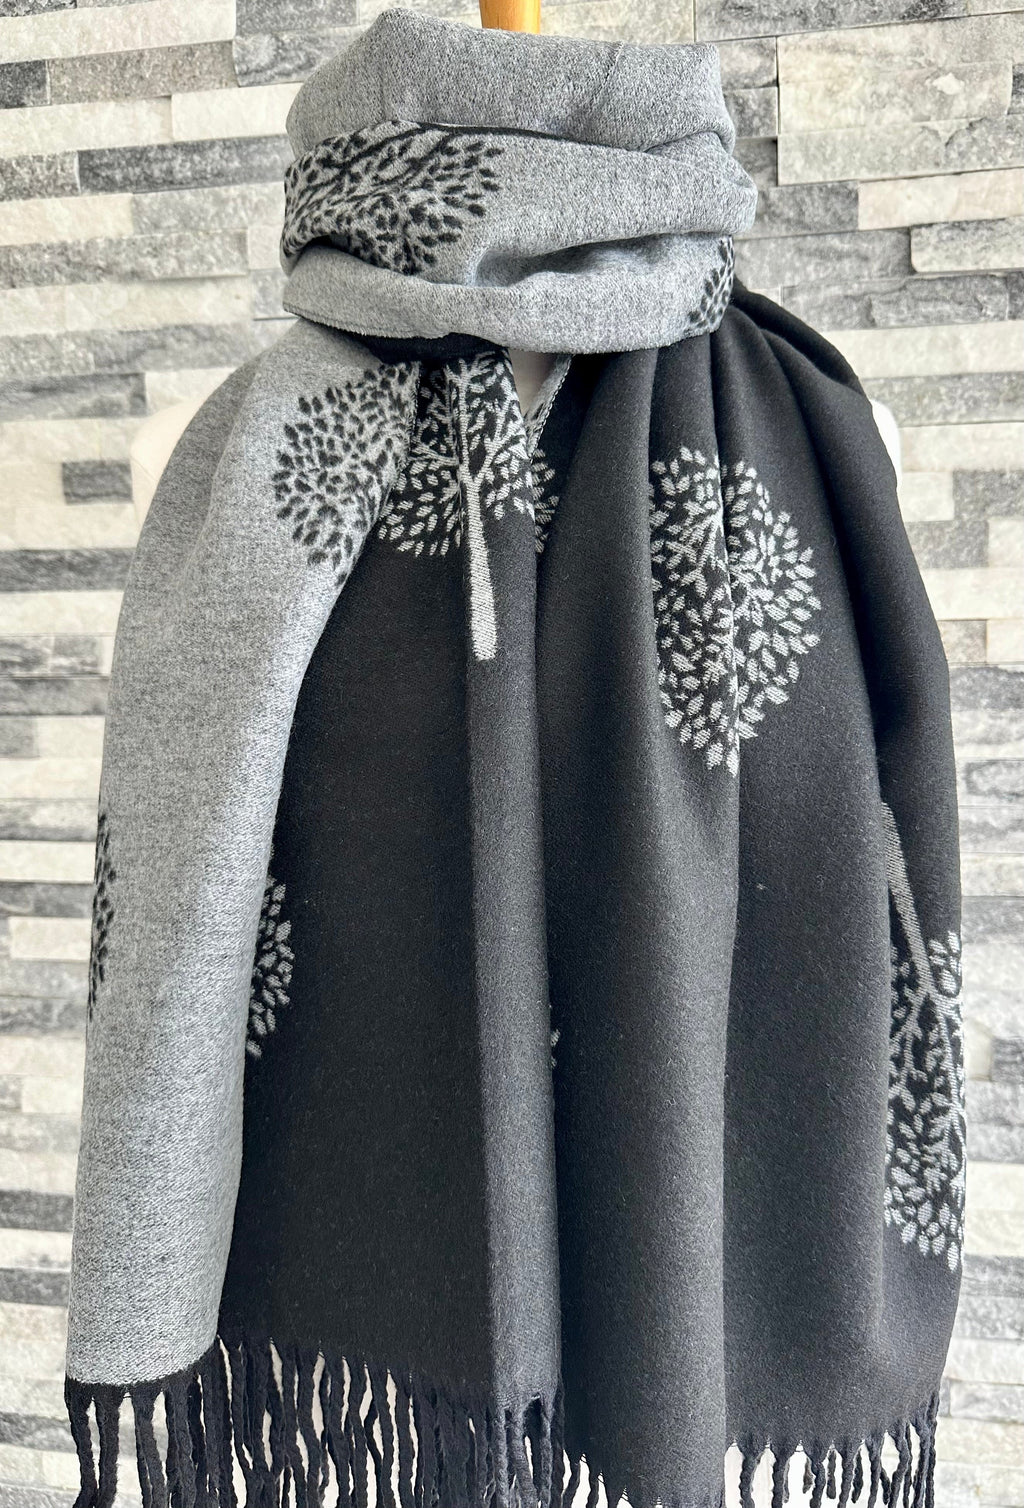 lusciousscarves Black and Grey Reversible Mulberry Tree Scarf / Wrap, Cashmere Blend